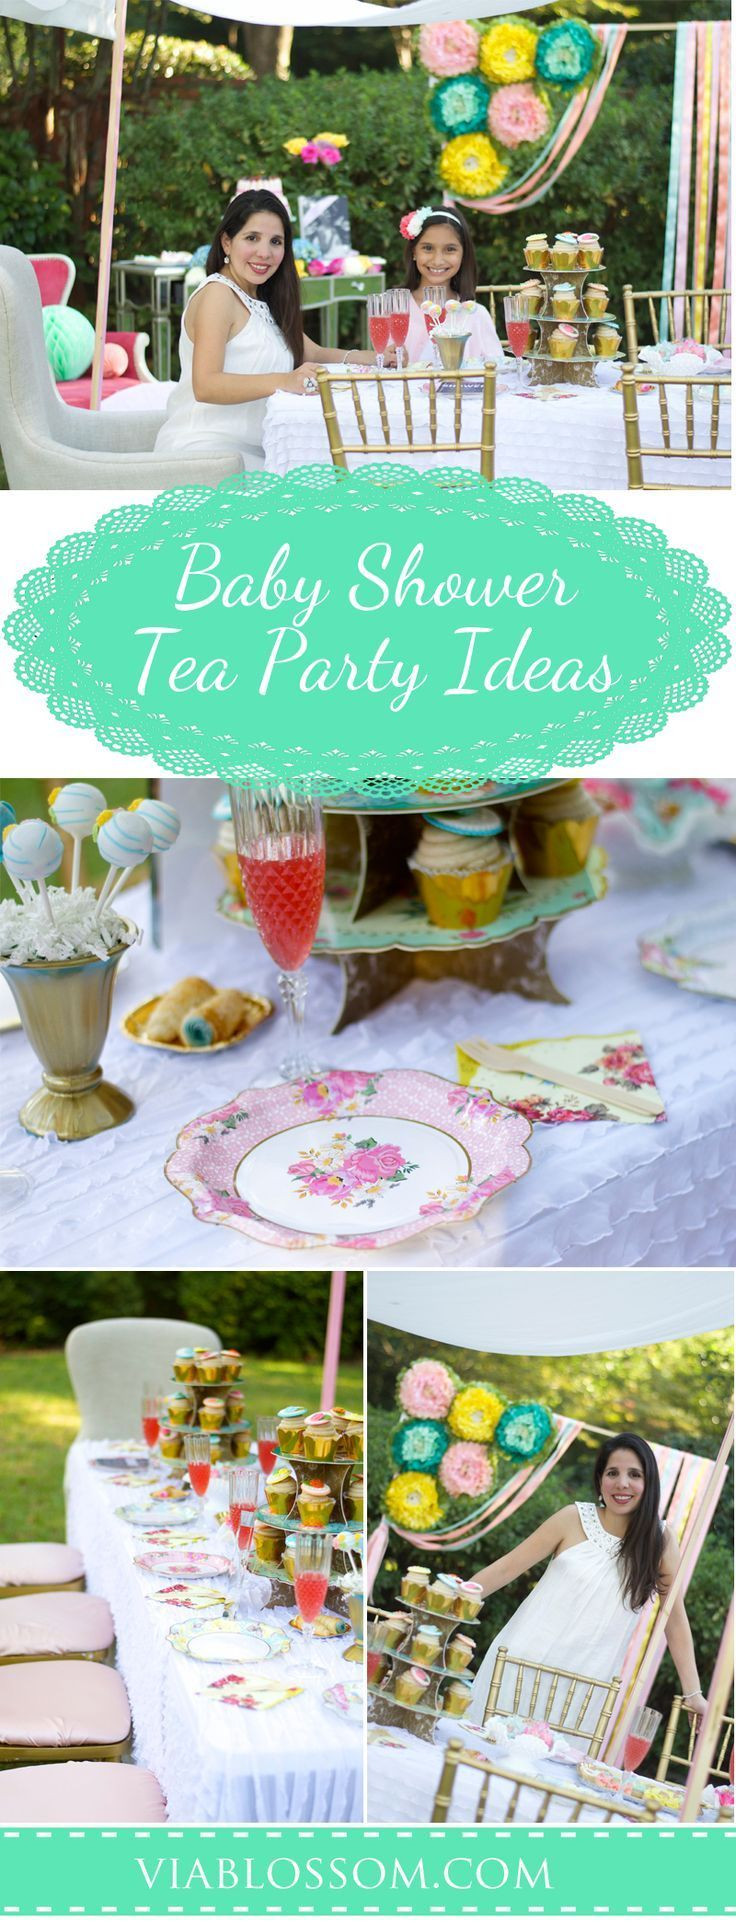 Baby Shower Tea Party Ideas
 8955 best Party Ideas & Trends by Party Bloggers images